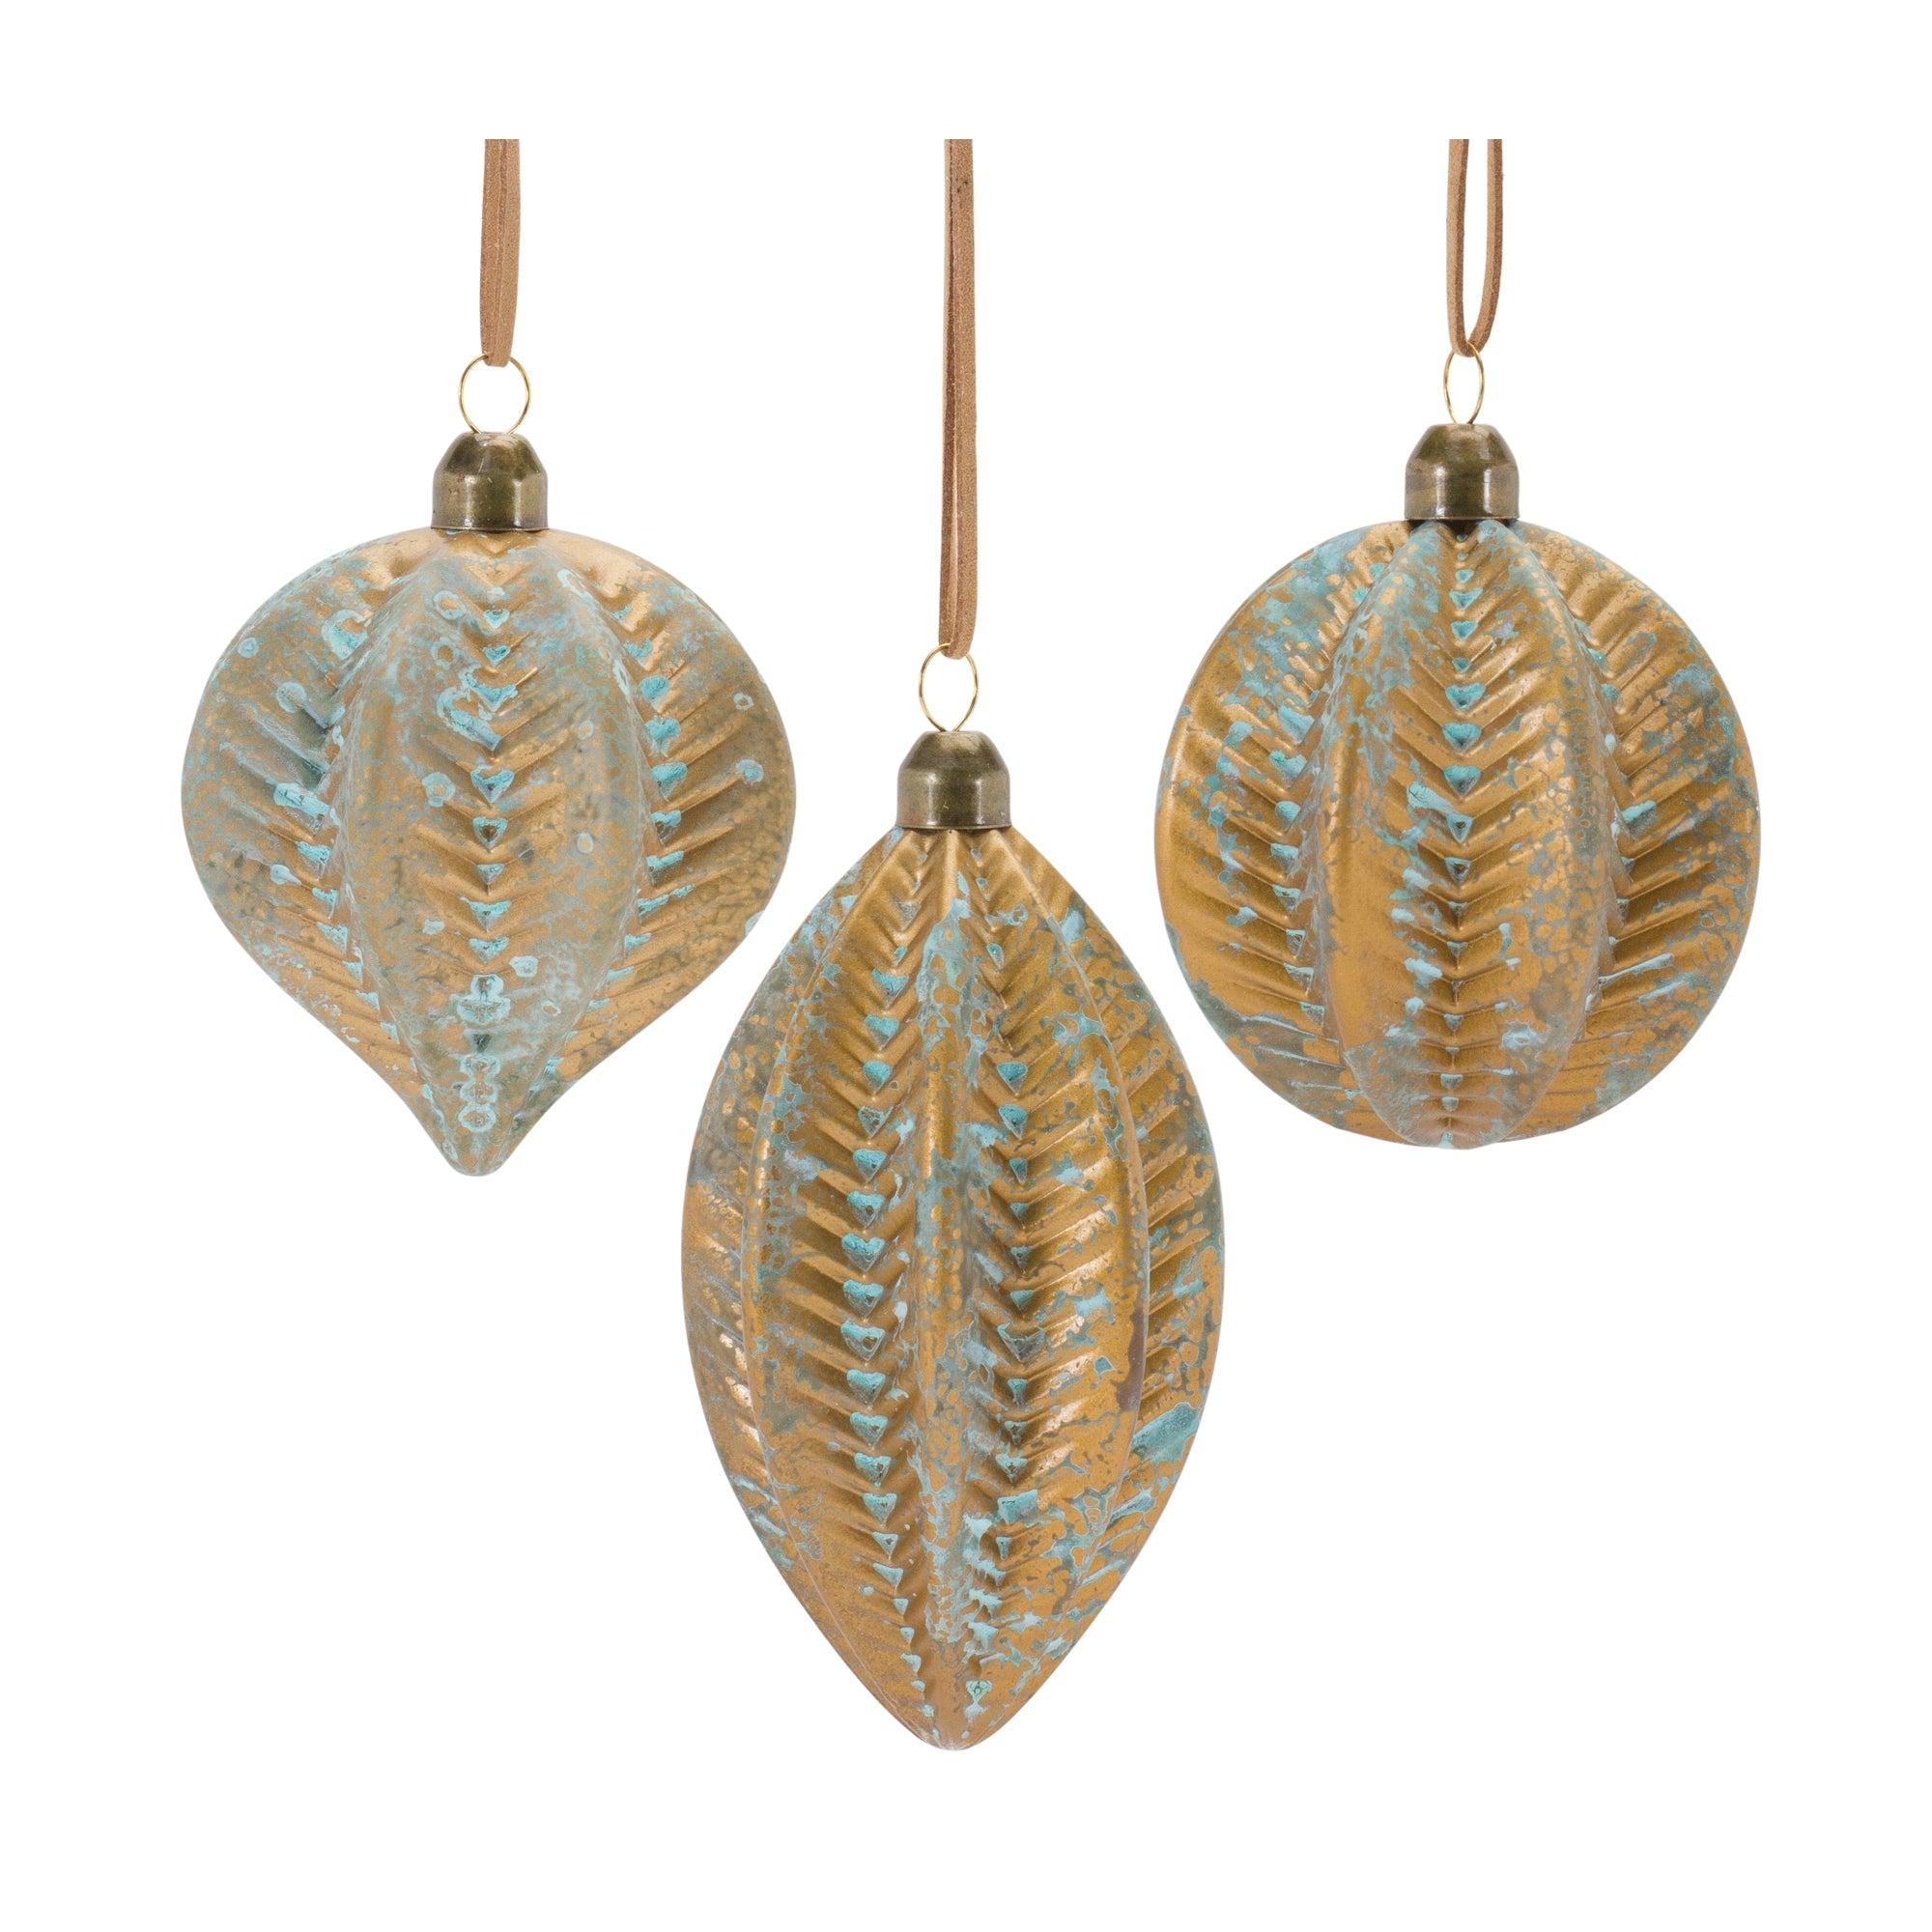 Distressed Ribbed Glass Ornament (Set of 12)